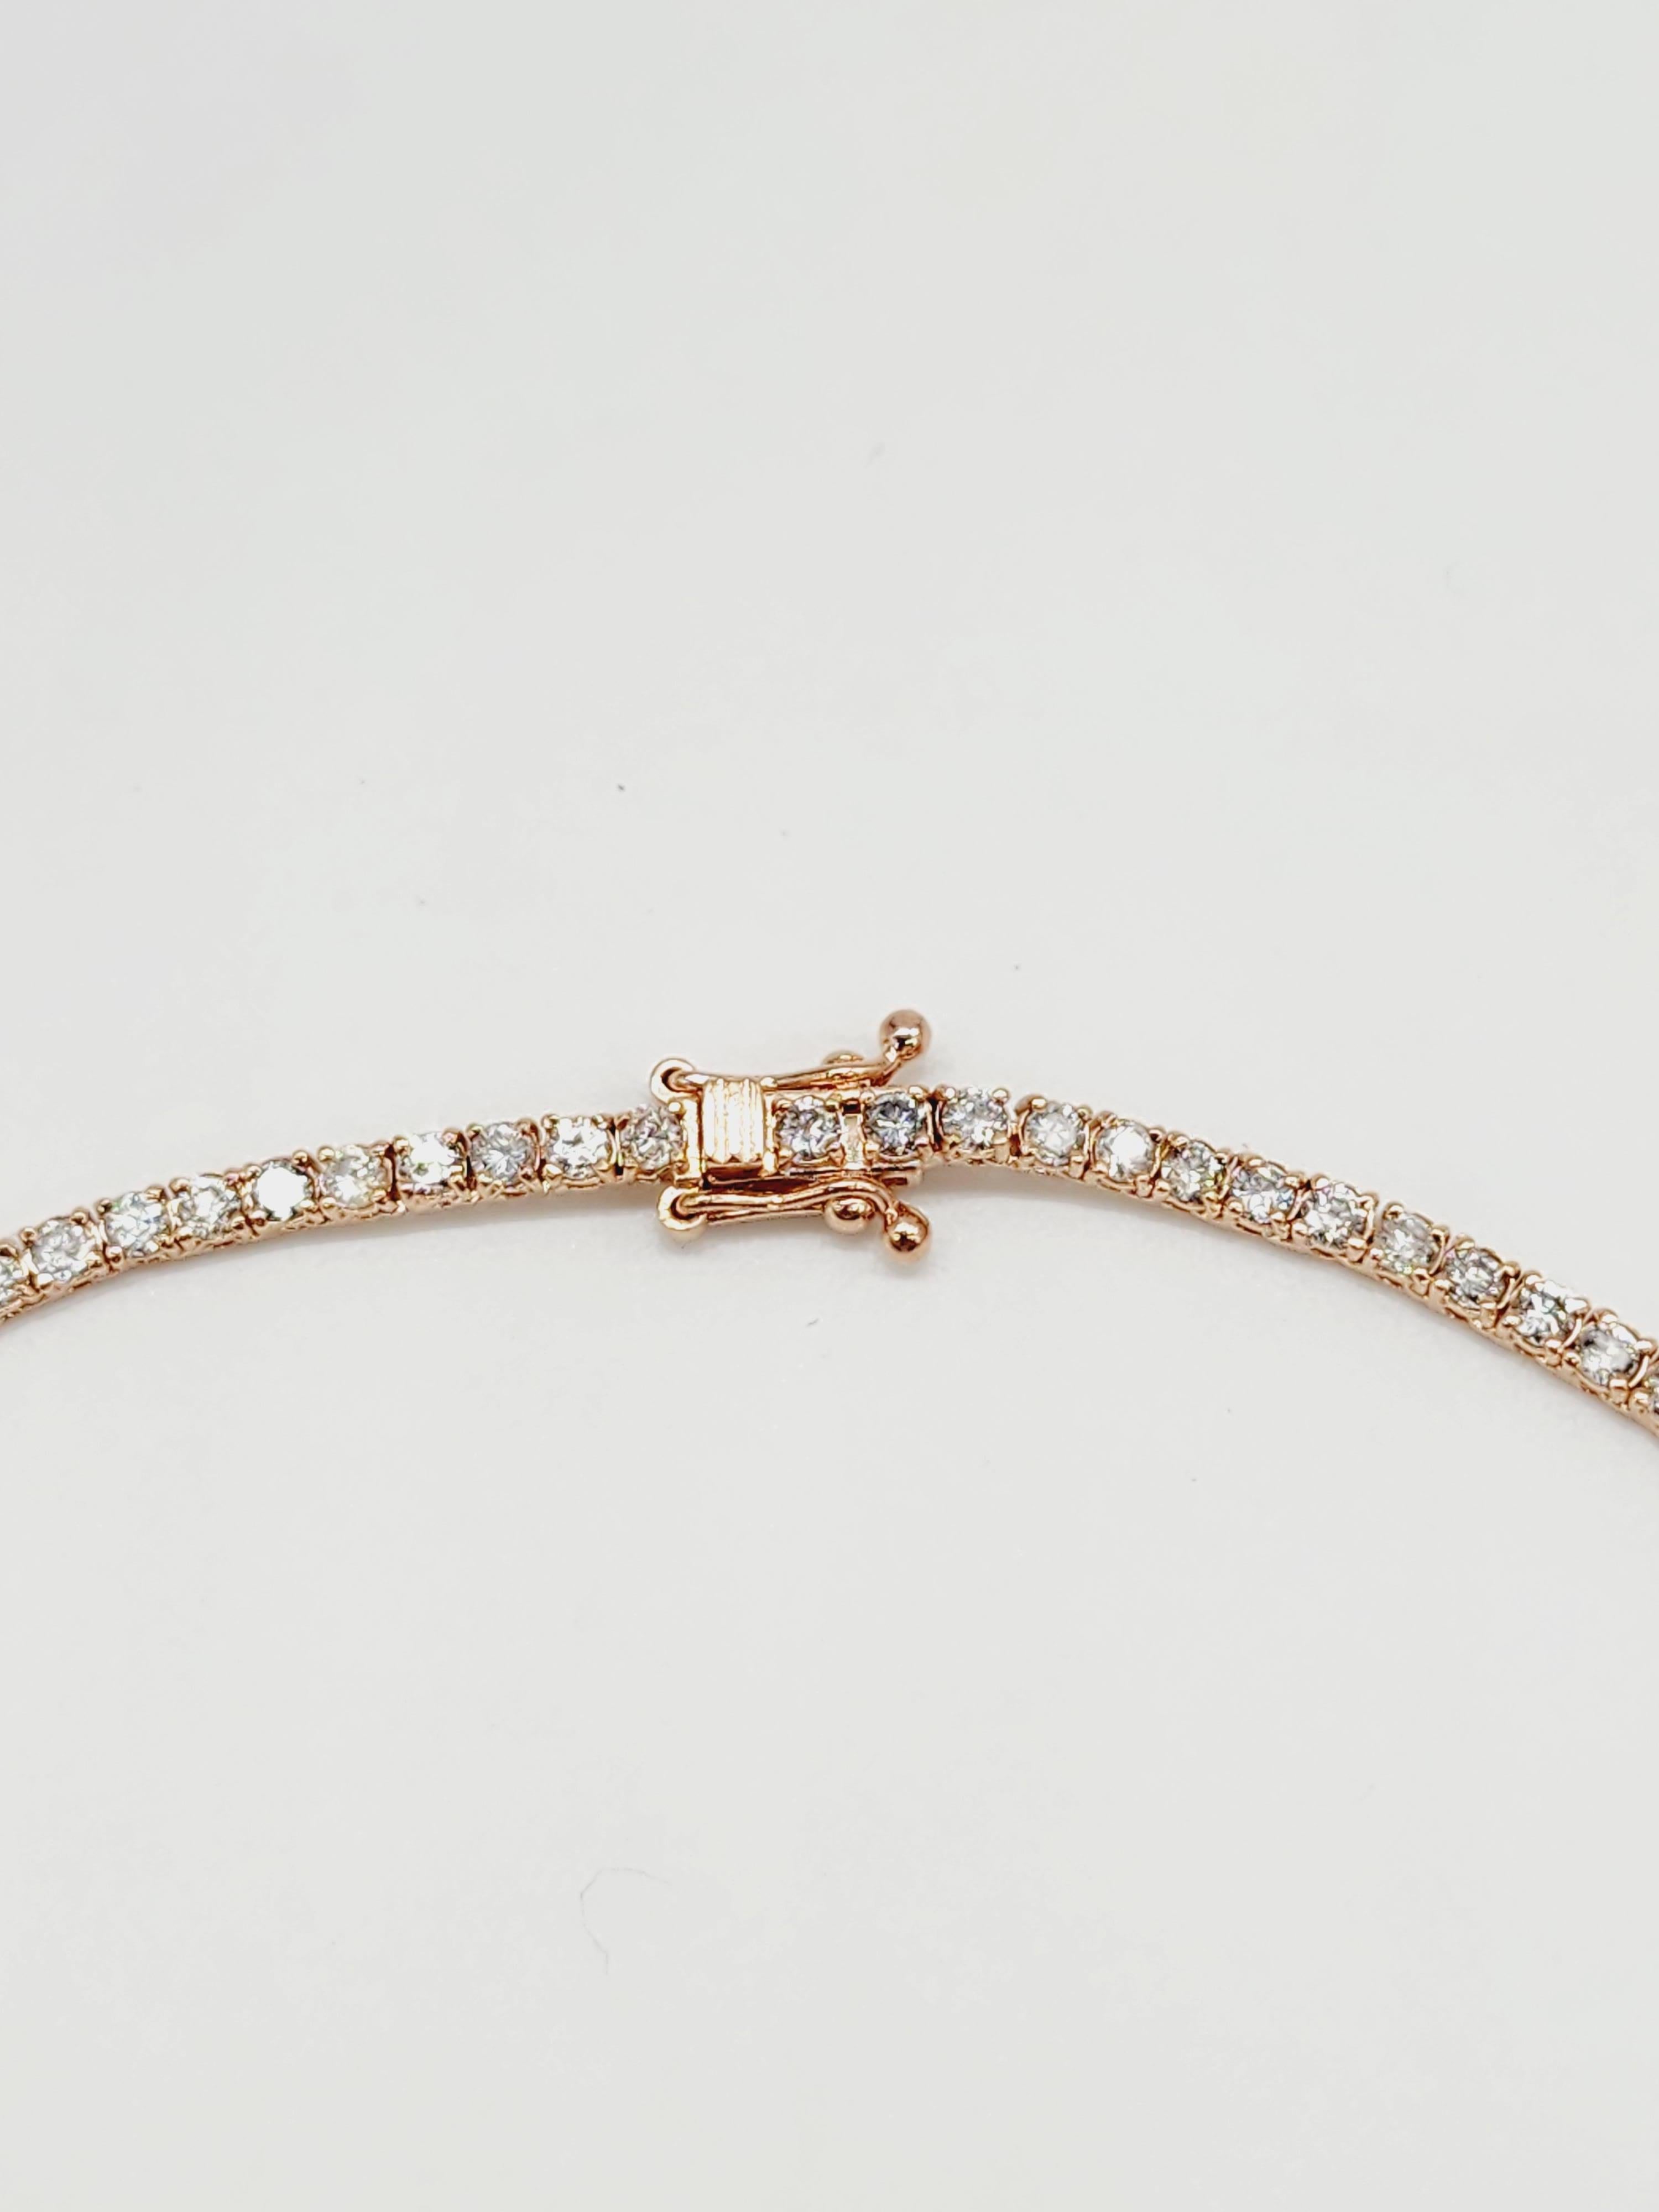 7.80 Carat Round Brilliant Cut Diamond Tennis Necklace 14 Karat Rose Gold In New Condition For Sale In Great Neck, NY